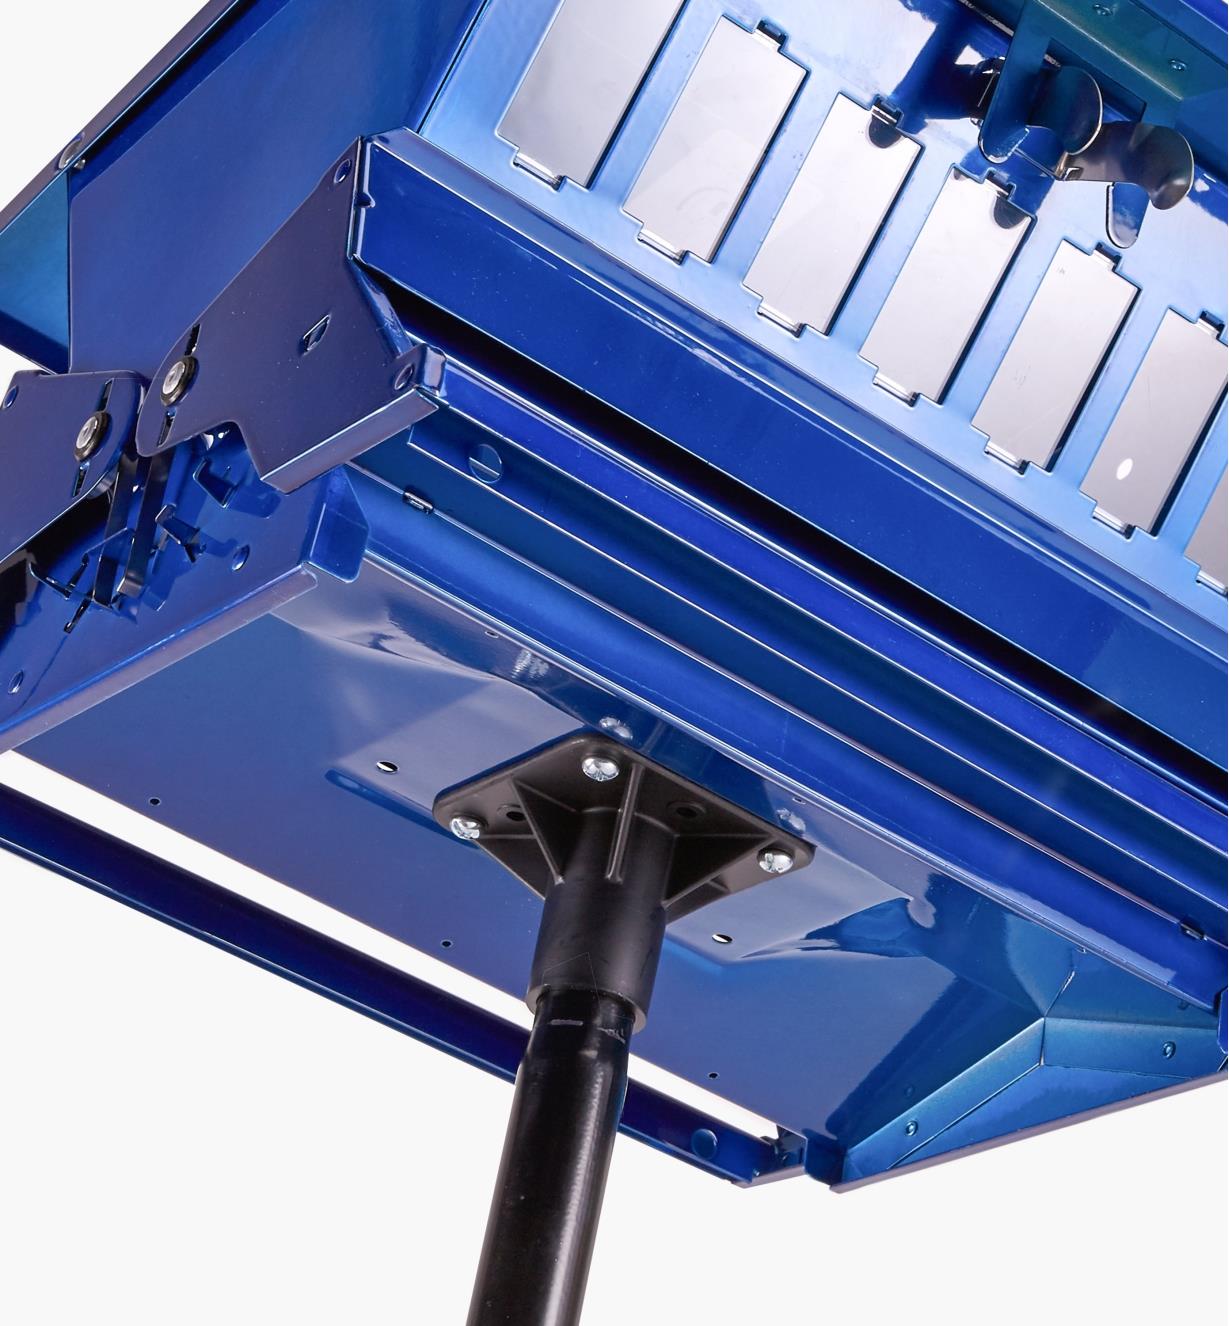 Pole attached to underside of double-sided feeder using included hardware